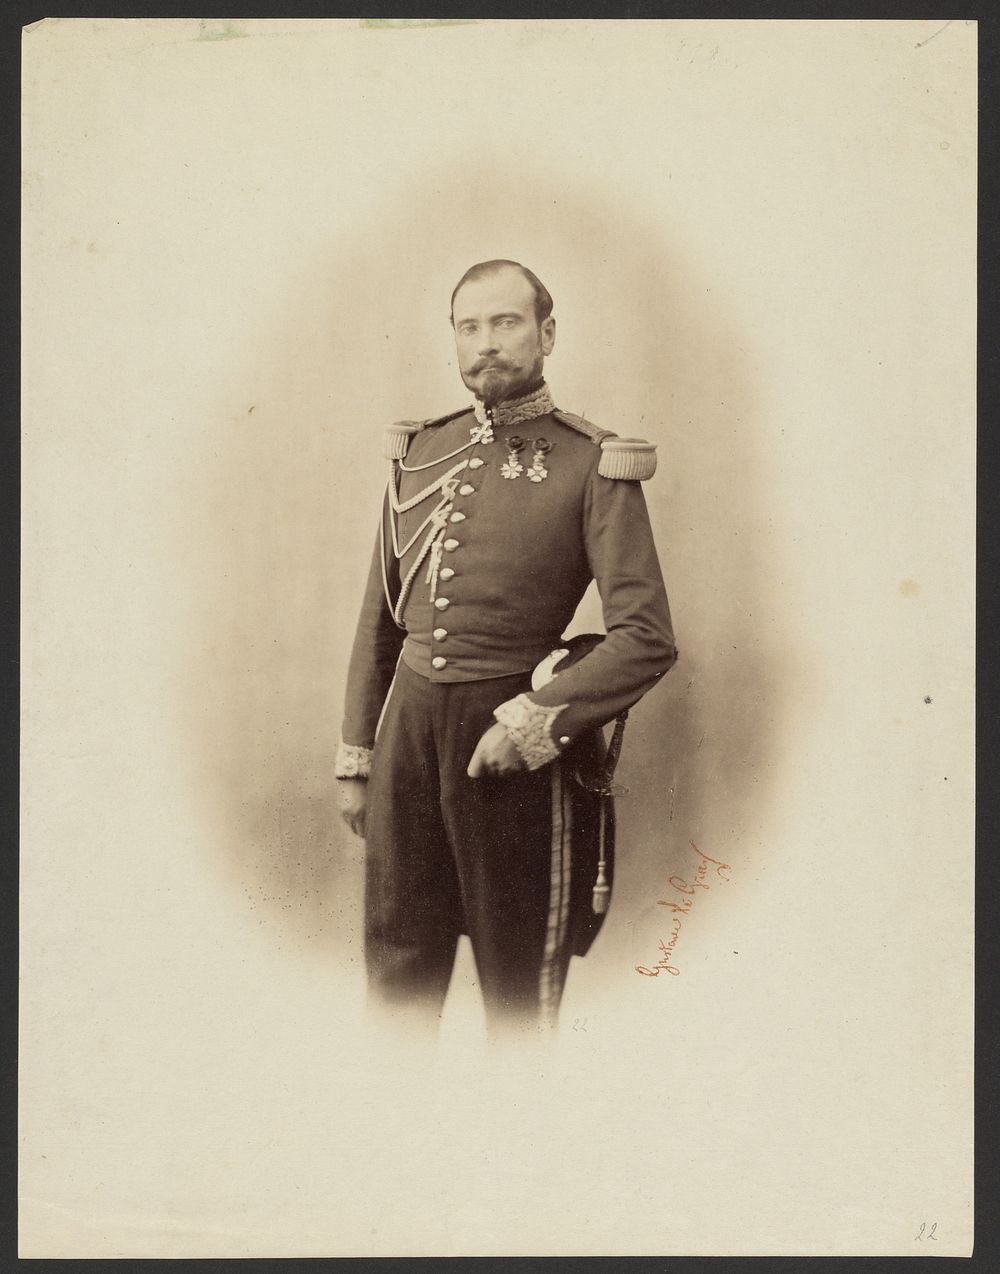 Colonel Lepic by Gustave Le Gray